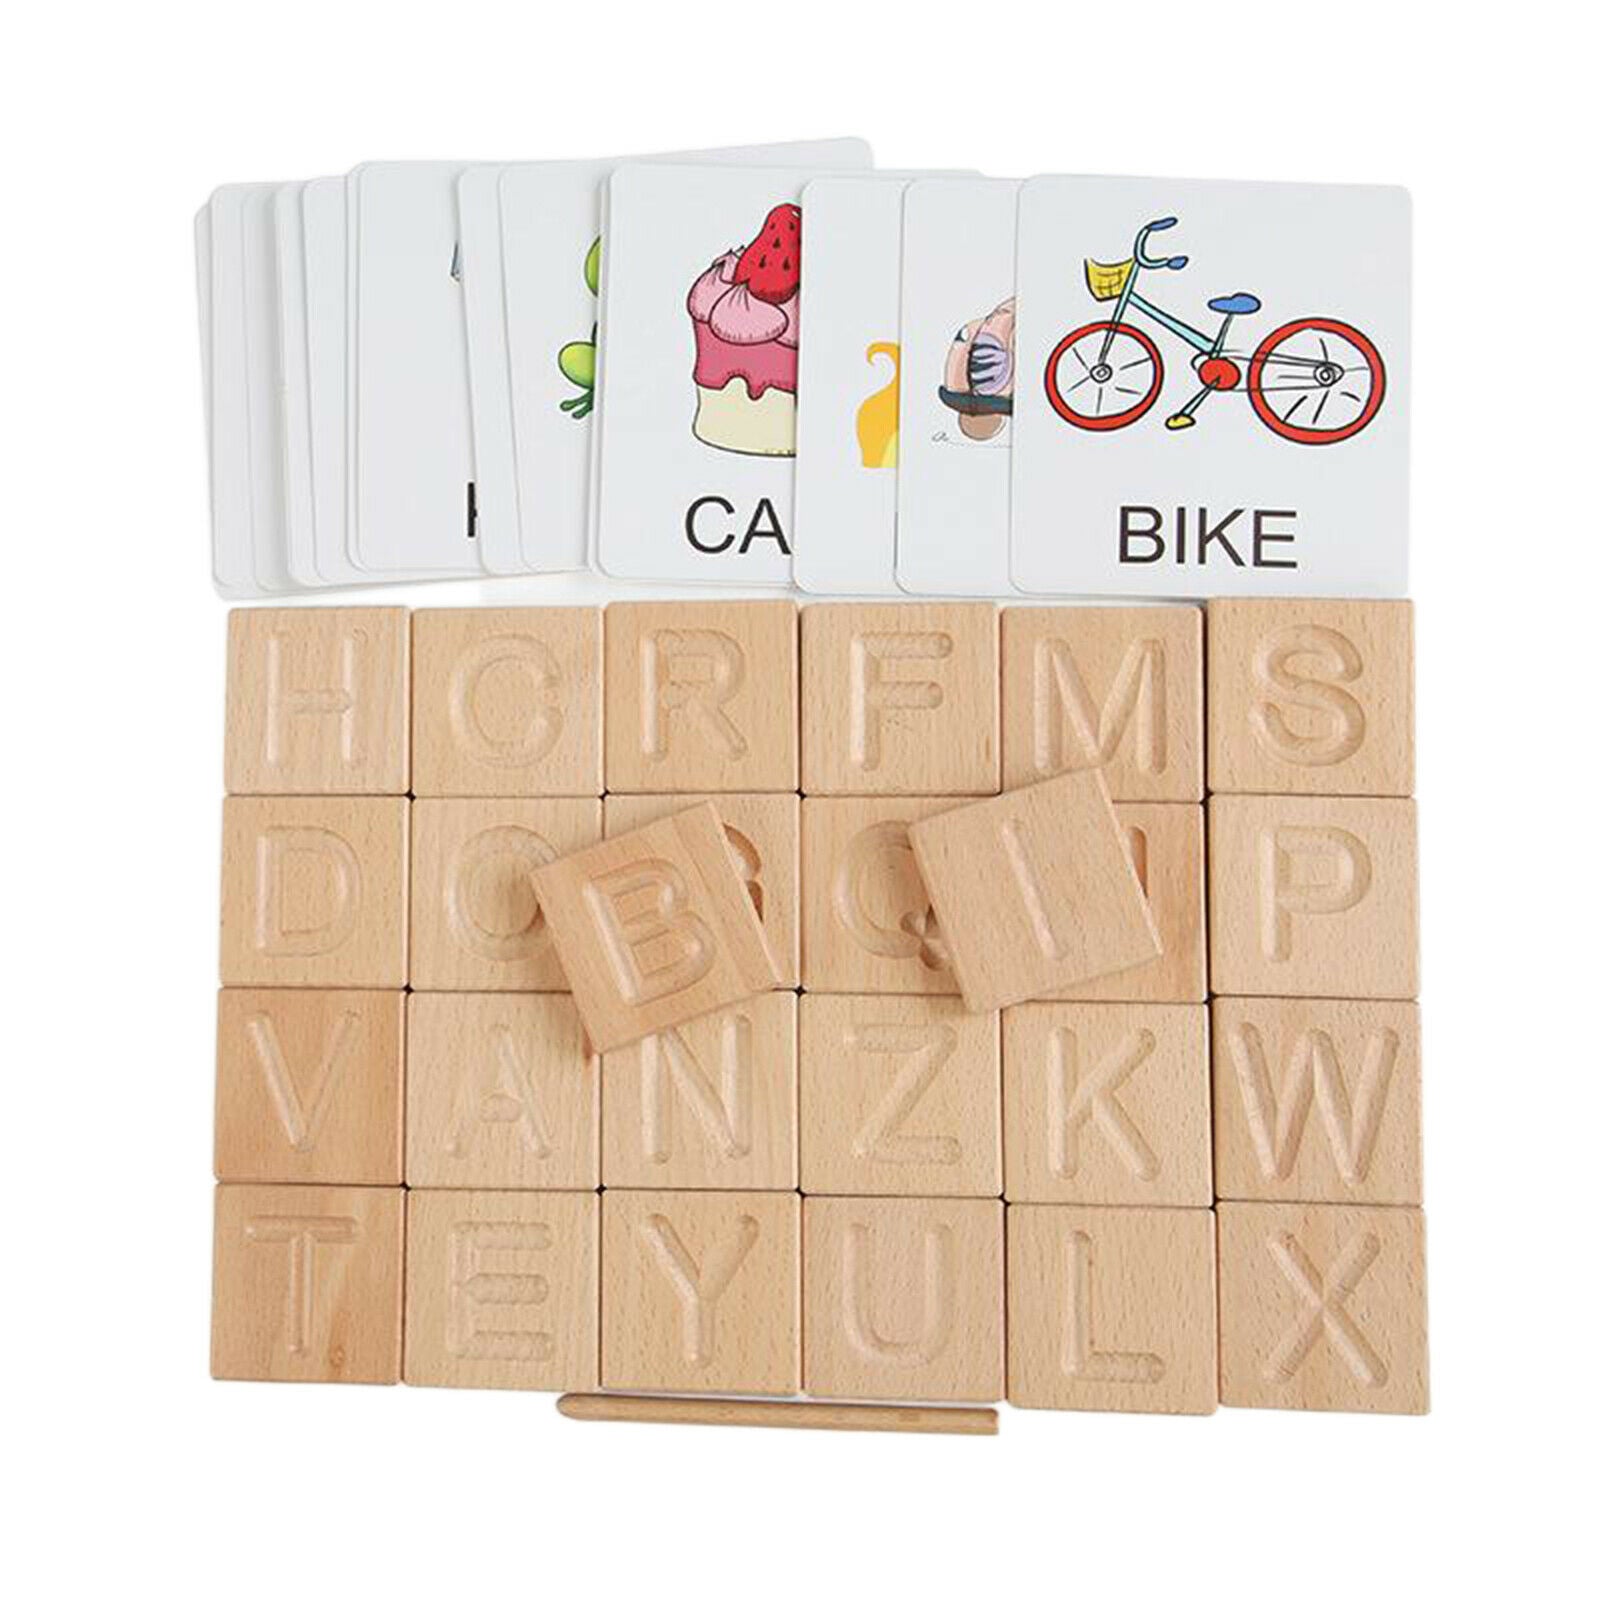 Preschool Learning Letter Tracing Alphabet Cards Set of 26 Pieces Double Sided